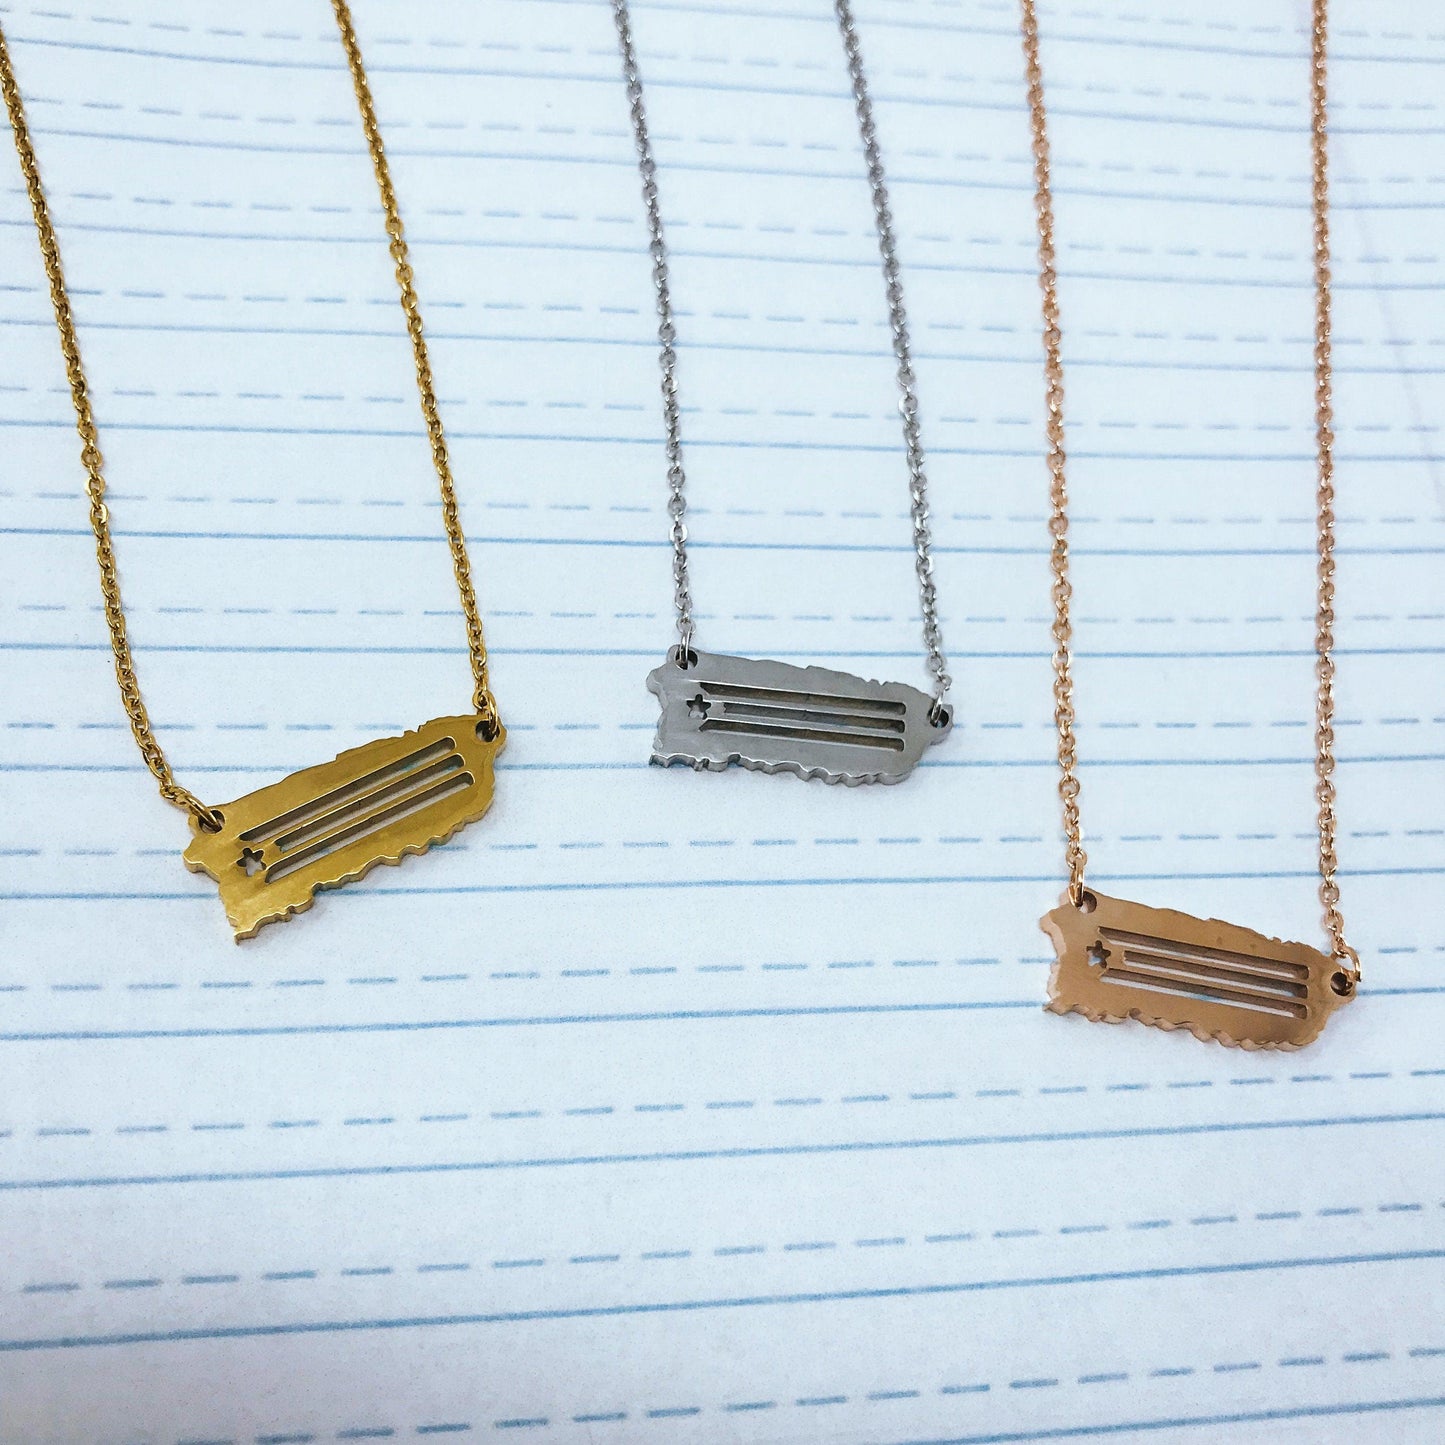 Puerto Rico Silhouette Necklaces in 3 different colors: Gold, Silver & Rose Gold